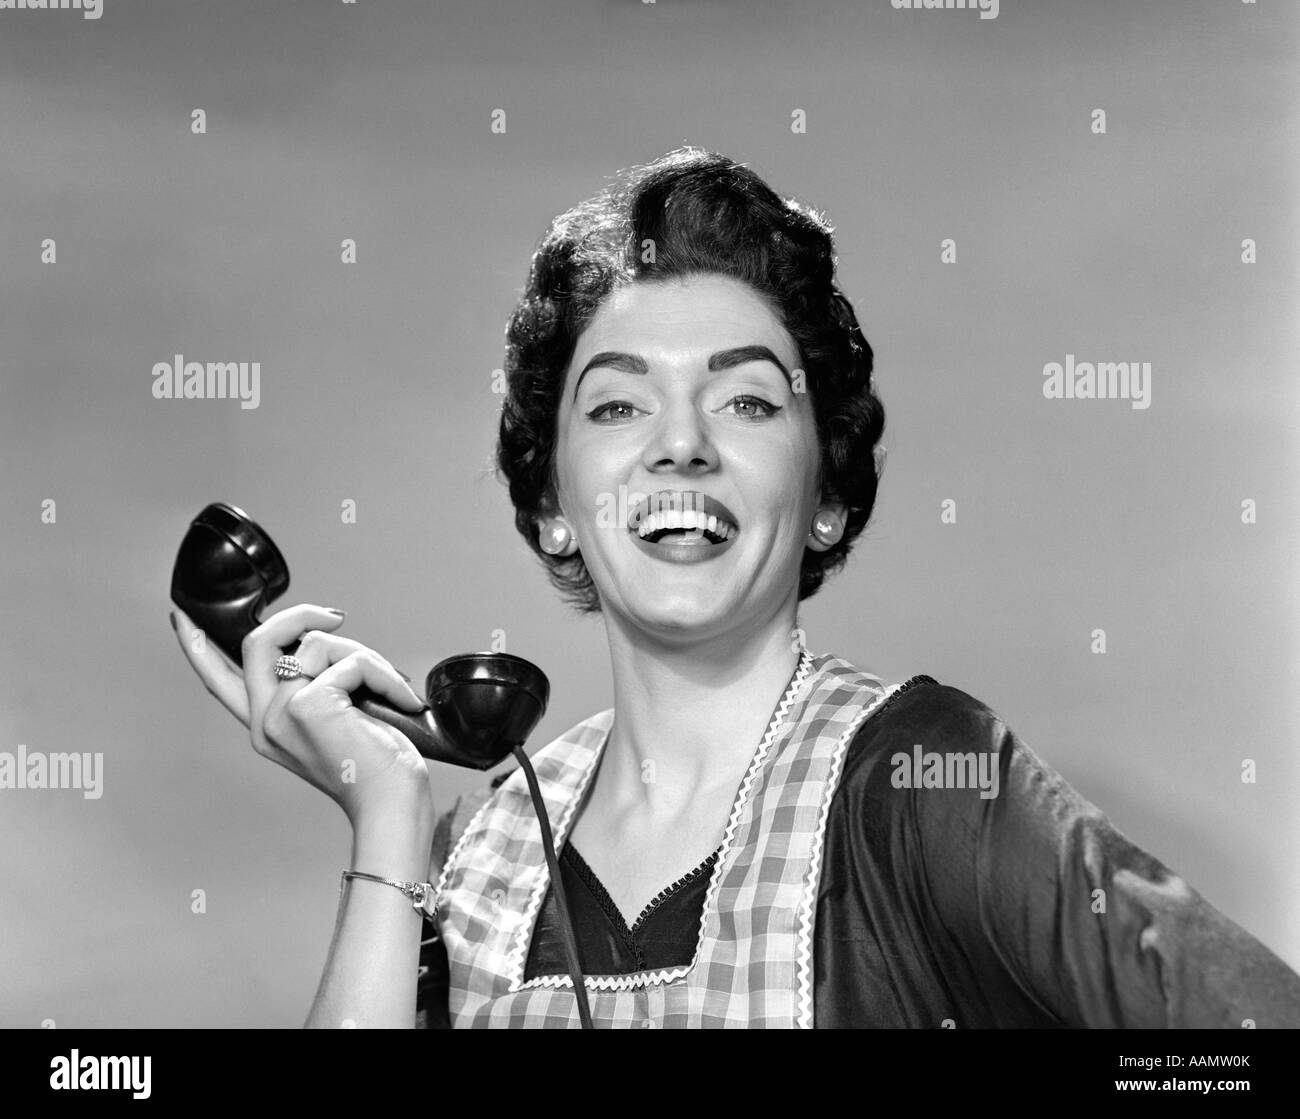 1950s WOMAN IN APRON HOLDING TELEPHONE RECEIVER IN HAND AWAY FROM EAR LOOKING AT CAMERA SMILING Stock Photo